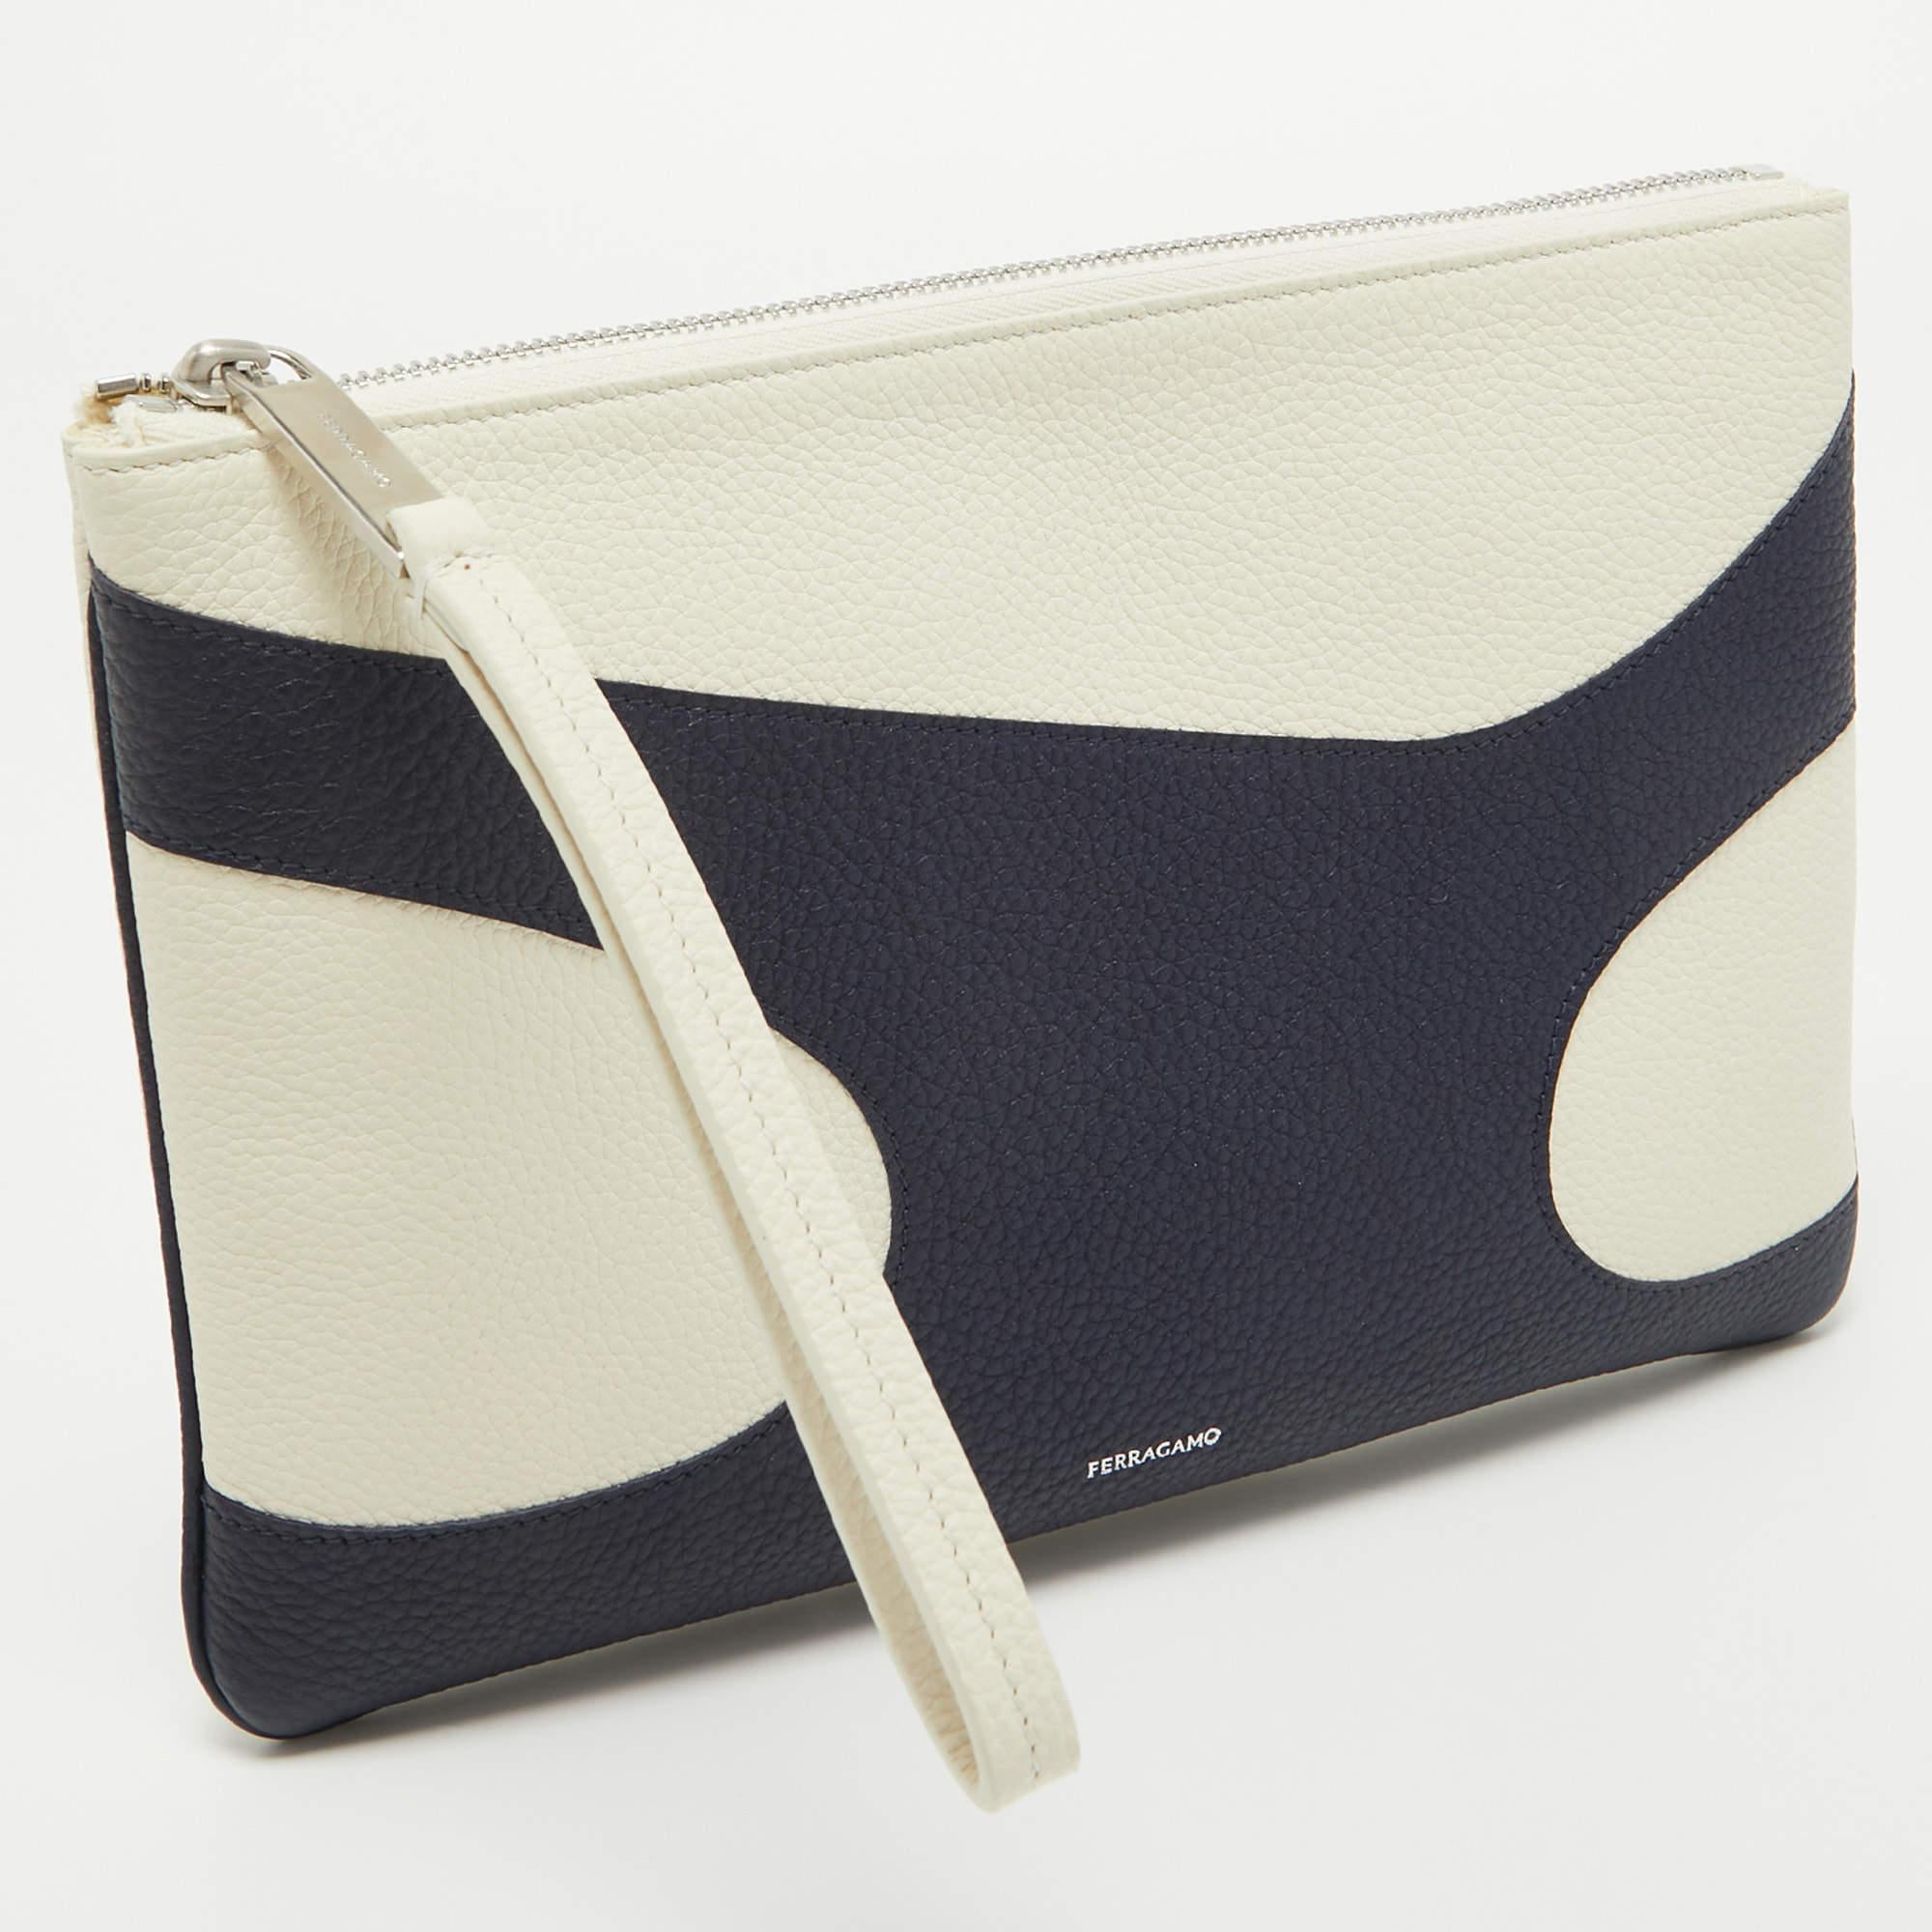 Salvatore Ferragamo marks a signature touch to this pouch. It flaunts the logo on the front and a canvas-lined well sized interior. The pouch can be carried using the wristlet.

